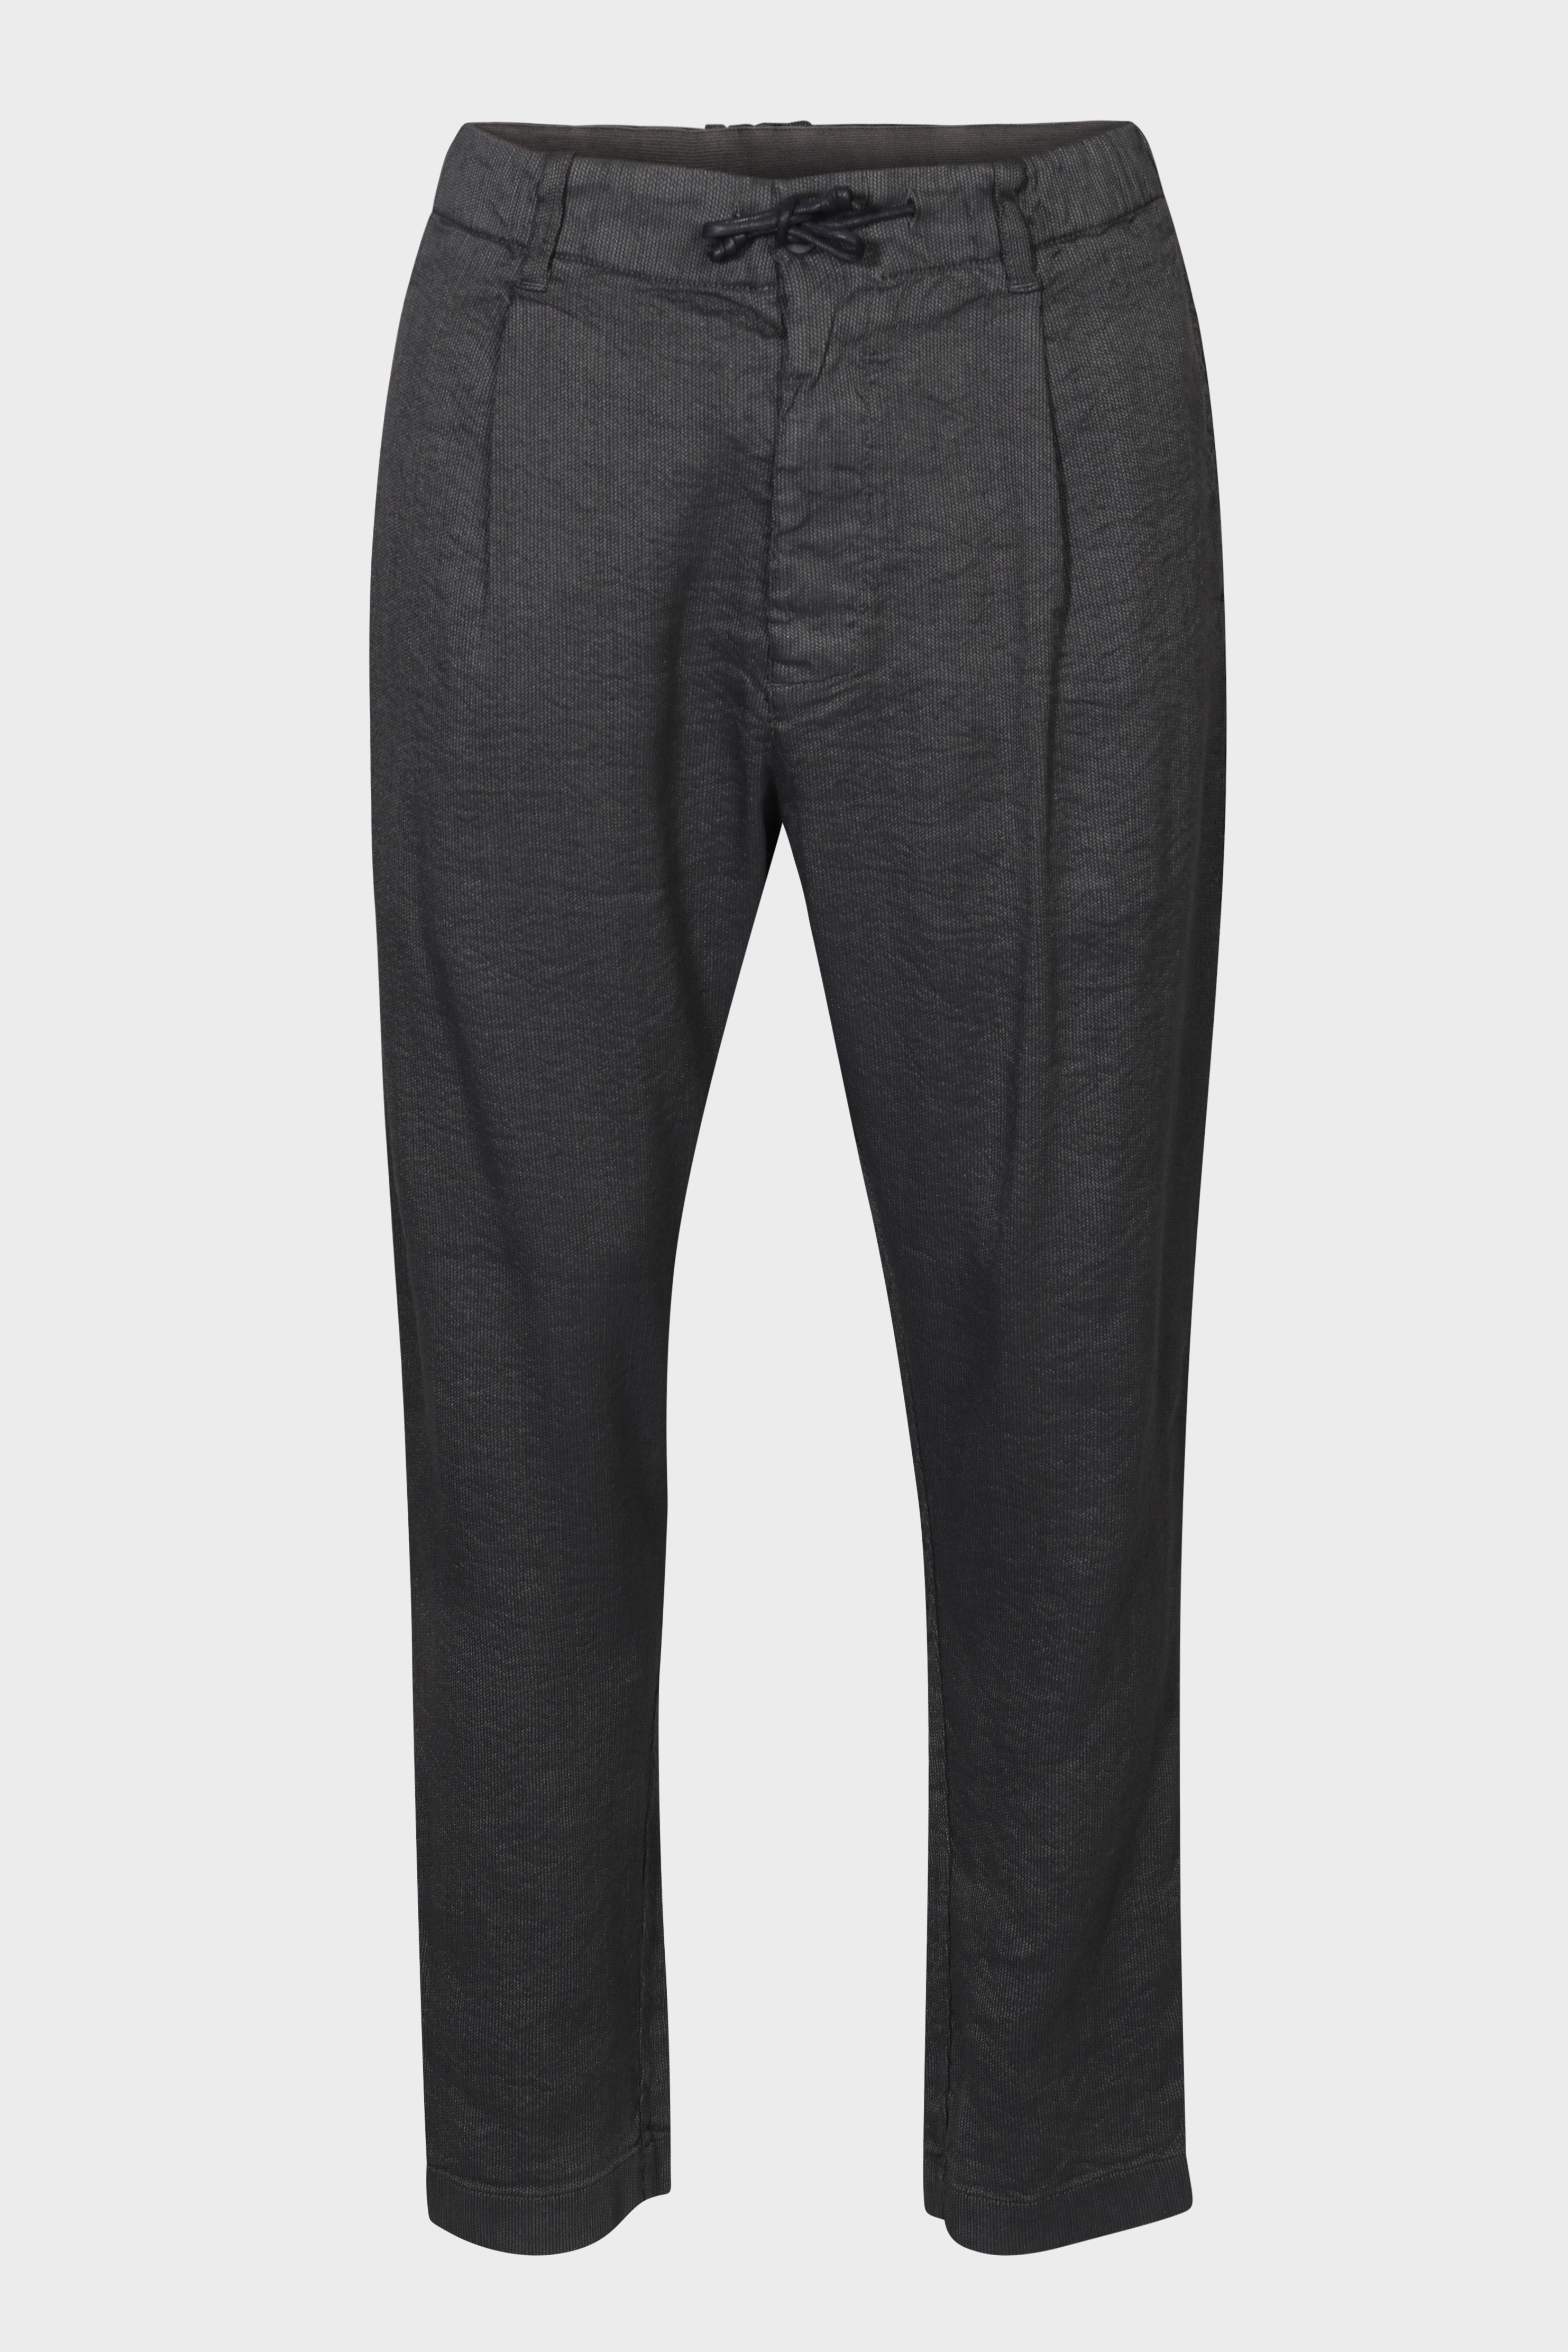 TRANSIT UOMO Structure Stretch Pant in Charcoal S